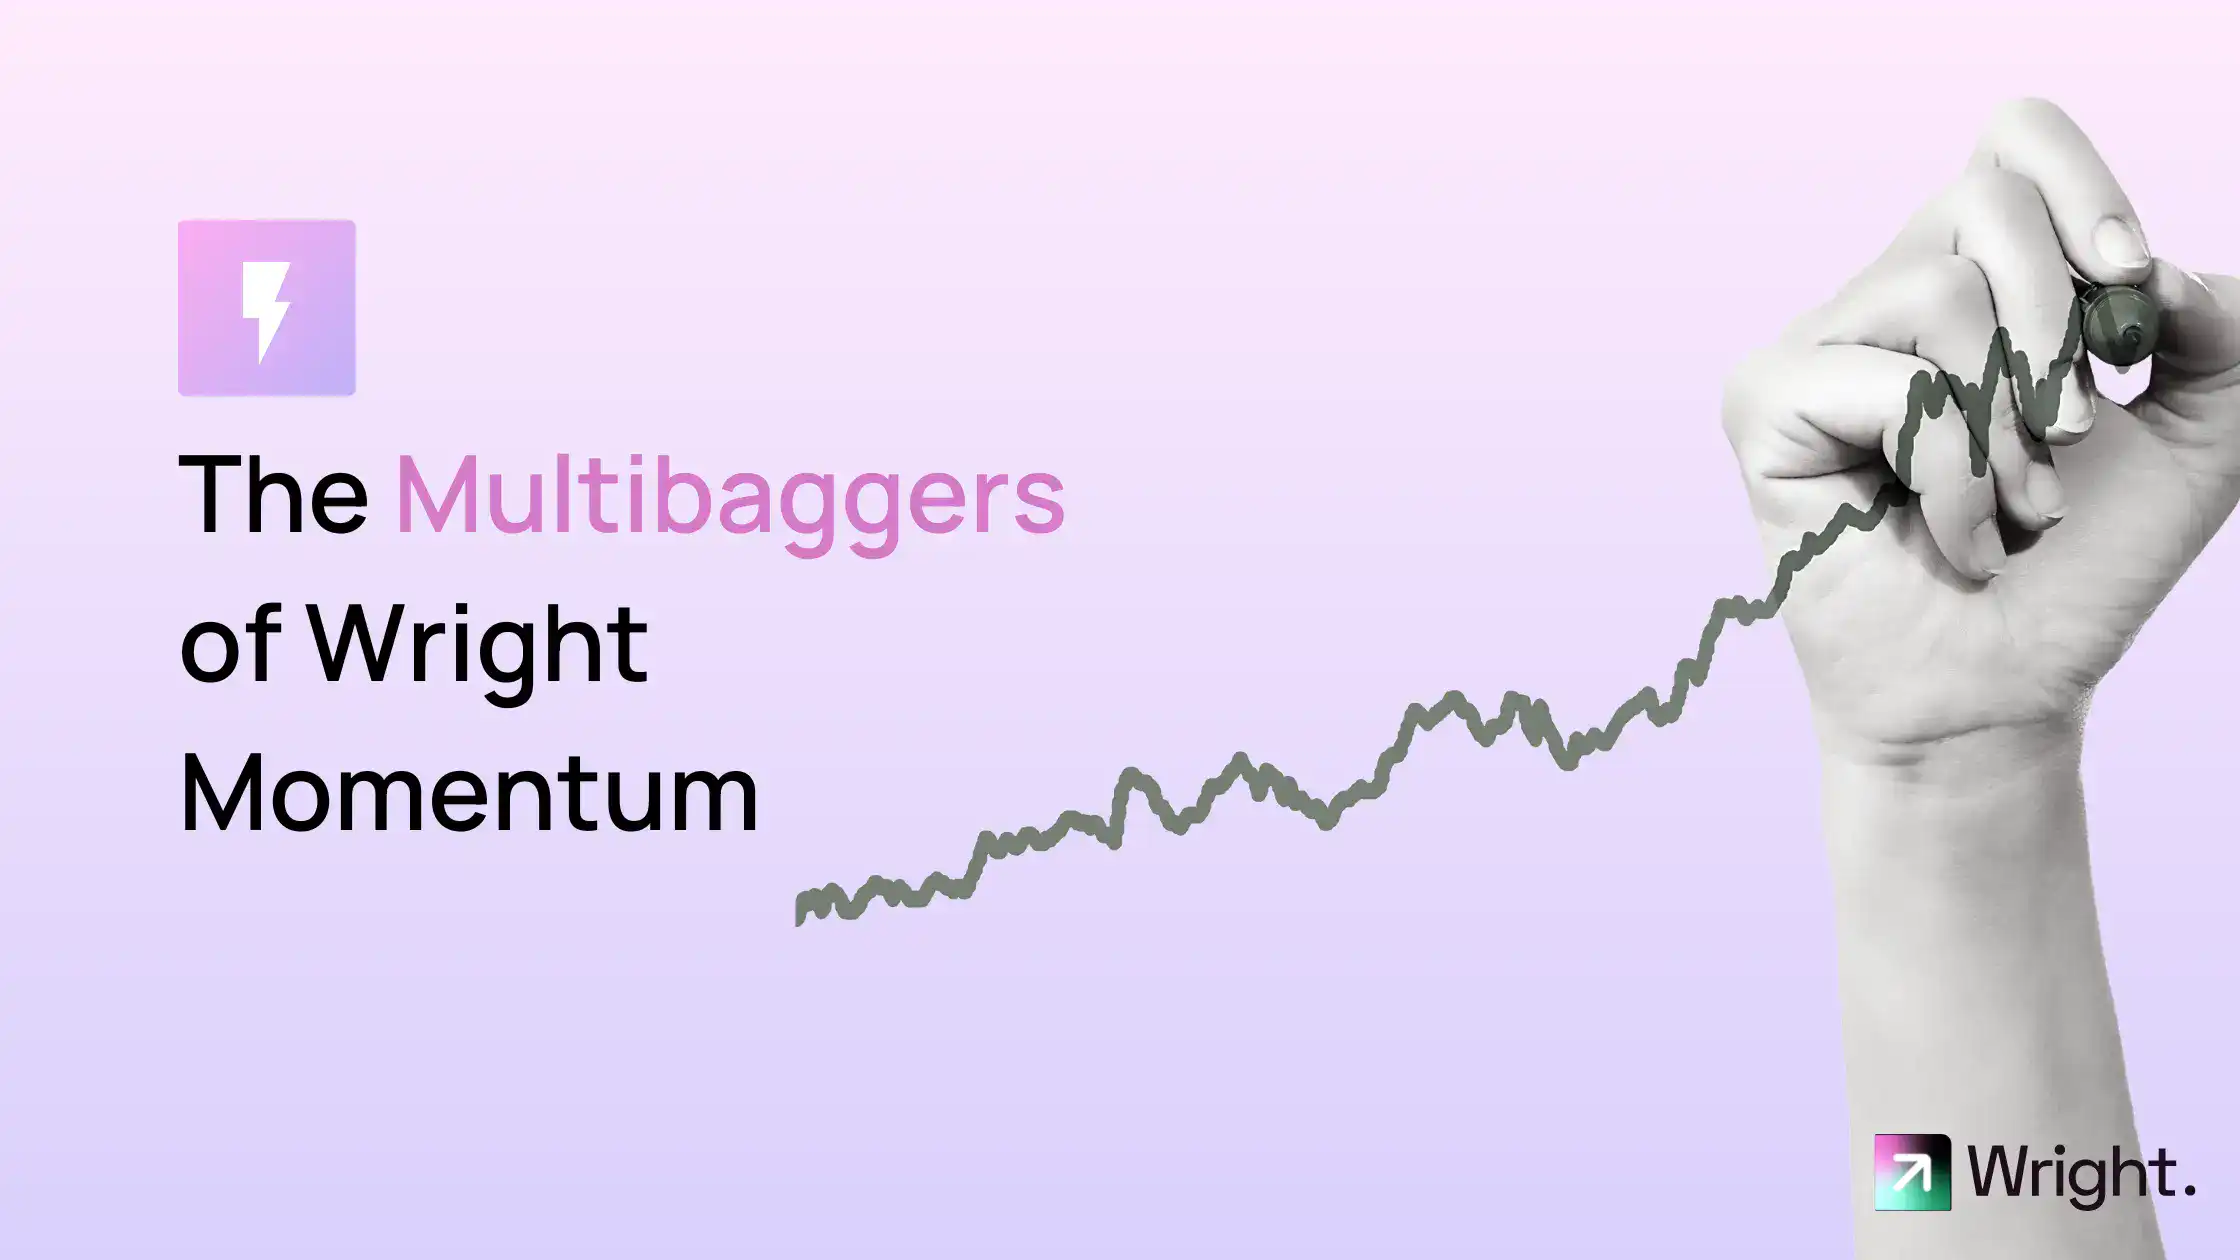 The Multibaggers of Momentum